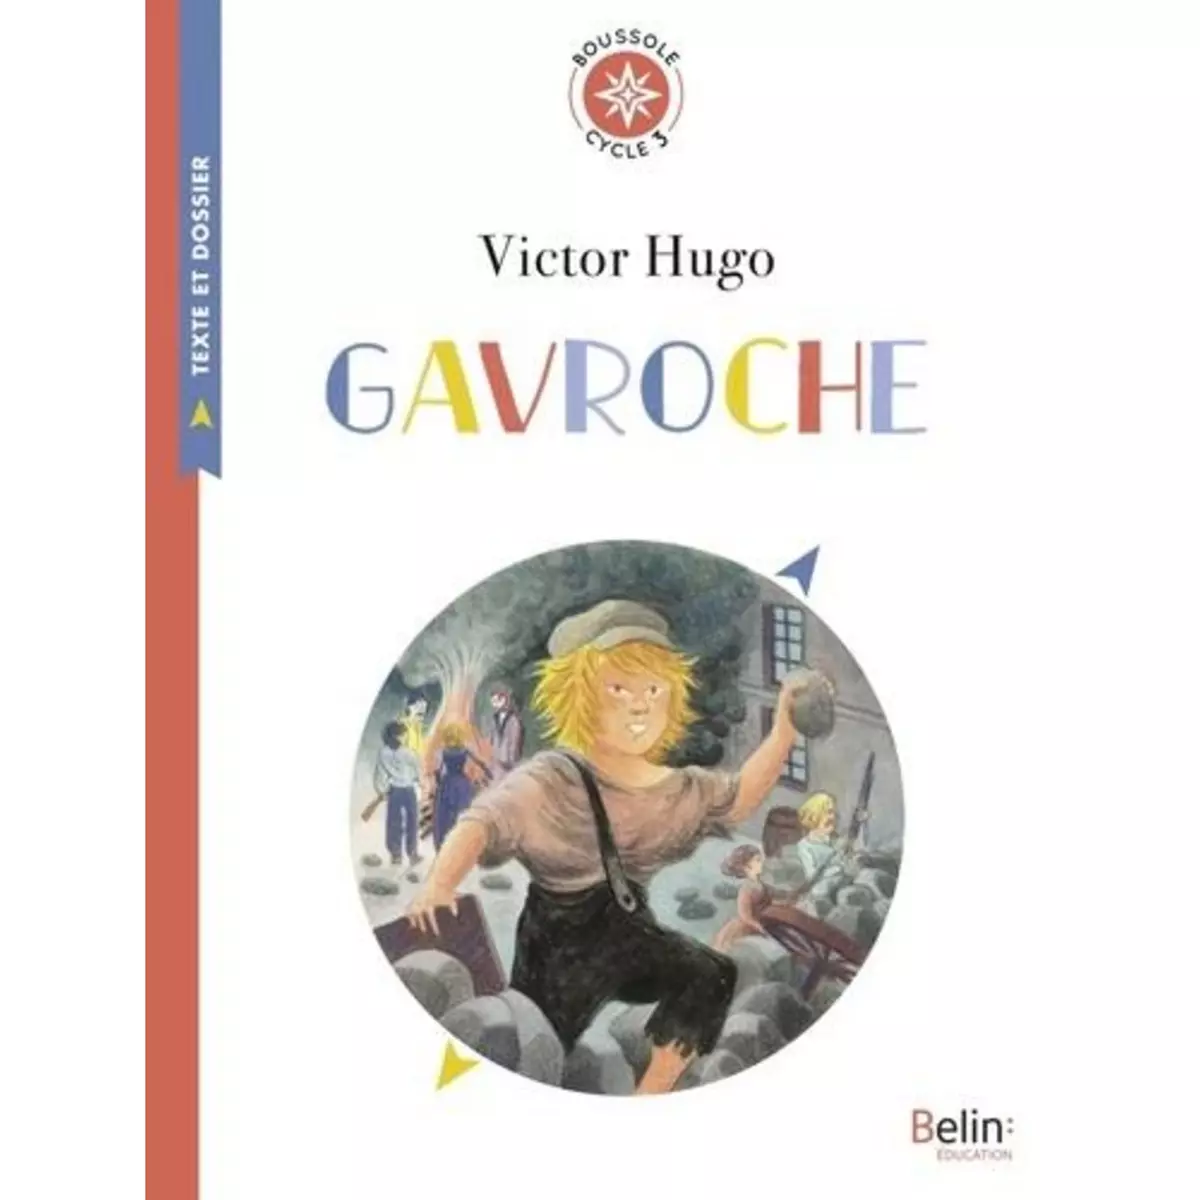  GAVROCHE. LES MISERABLES, CYCLE 3, Hugo Victor